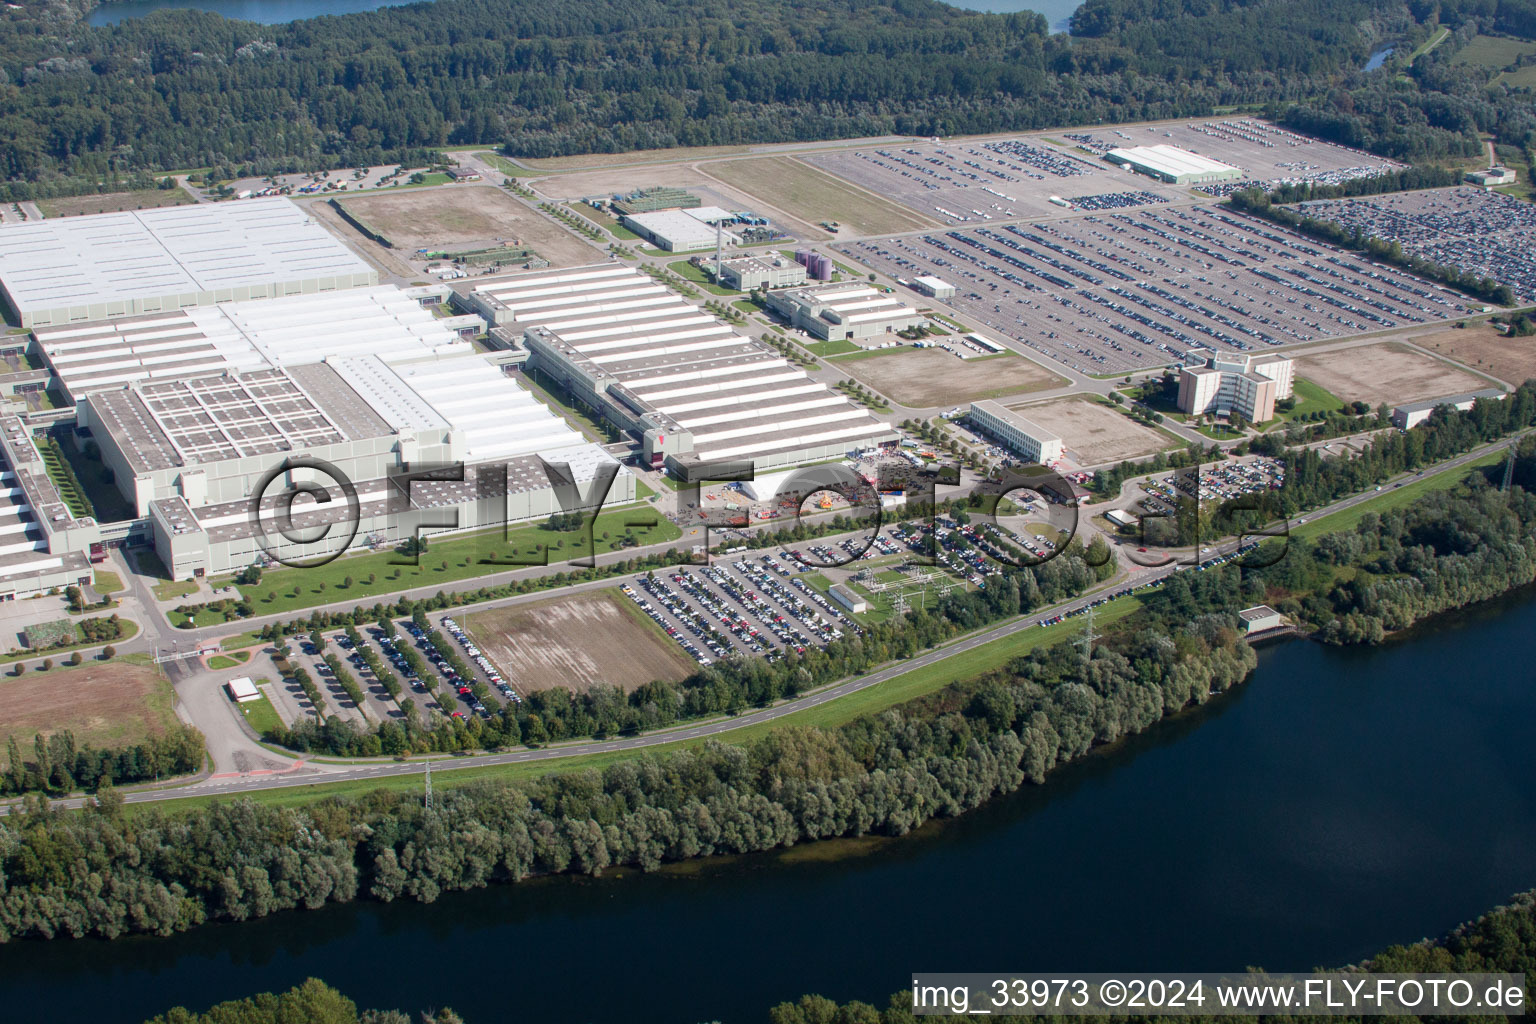 Oblique view of Building complex and grounds of the logistics center Daimler AG Global Logistic Center on the Island Gruen in Germersheim in the state Rhineland-Palatinate, Germany